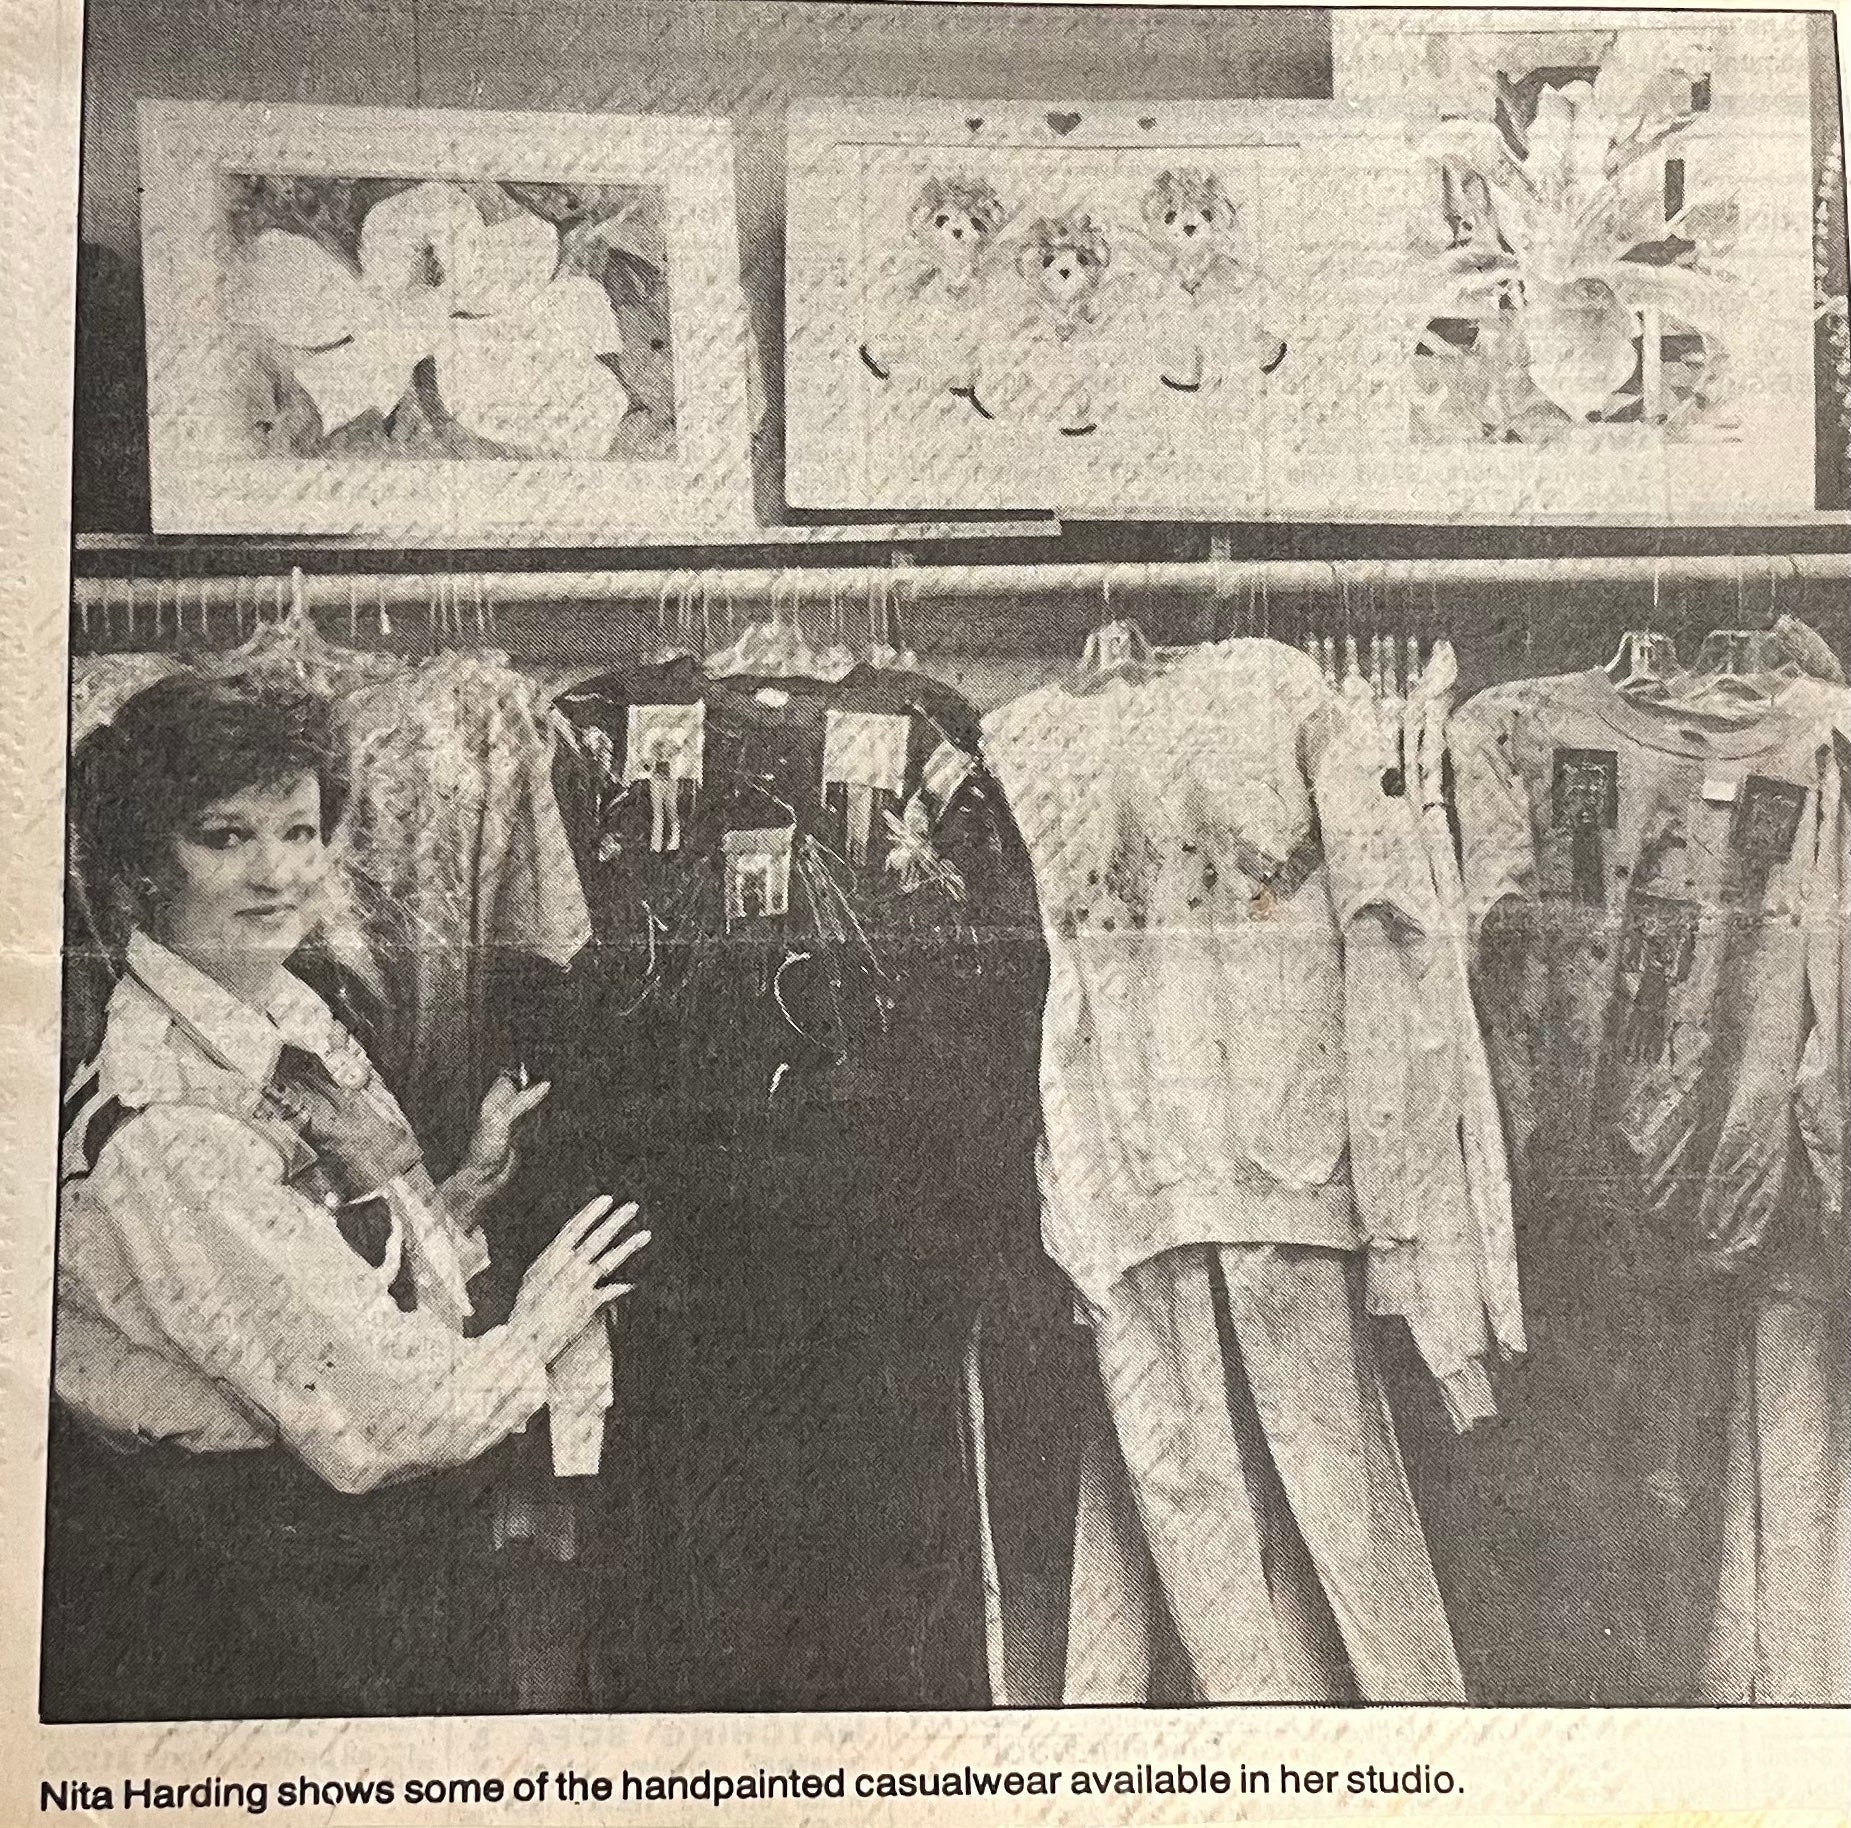 Article about Mom and her art studio in the news.